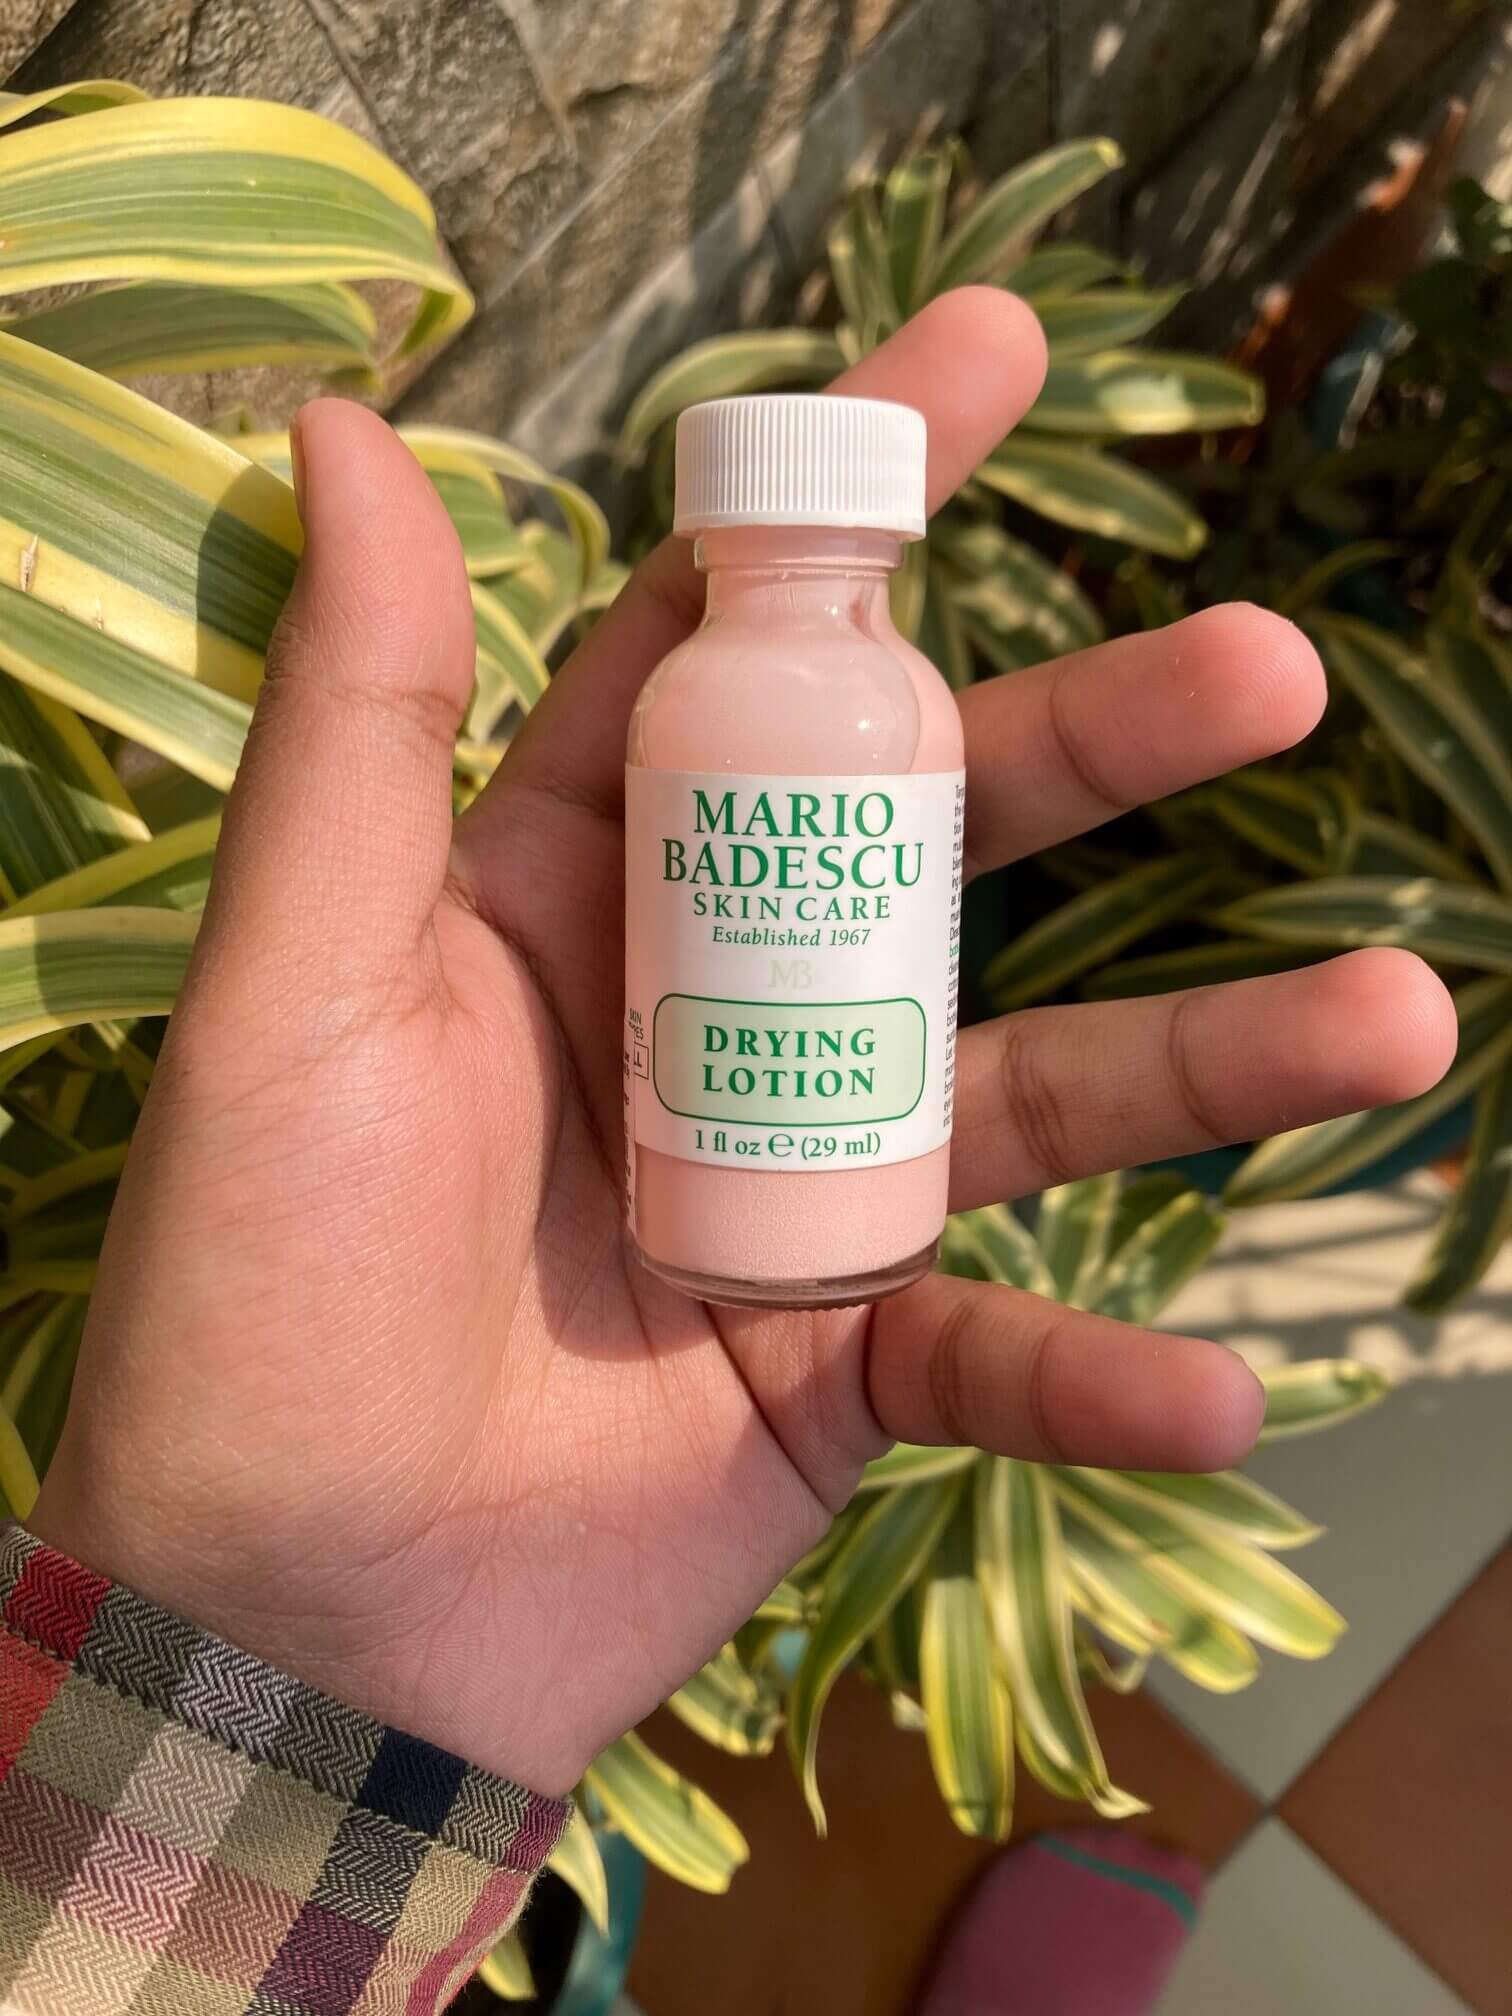 Mario Badescu Acne Spot Treatment Drying Lotion Review